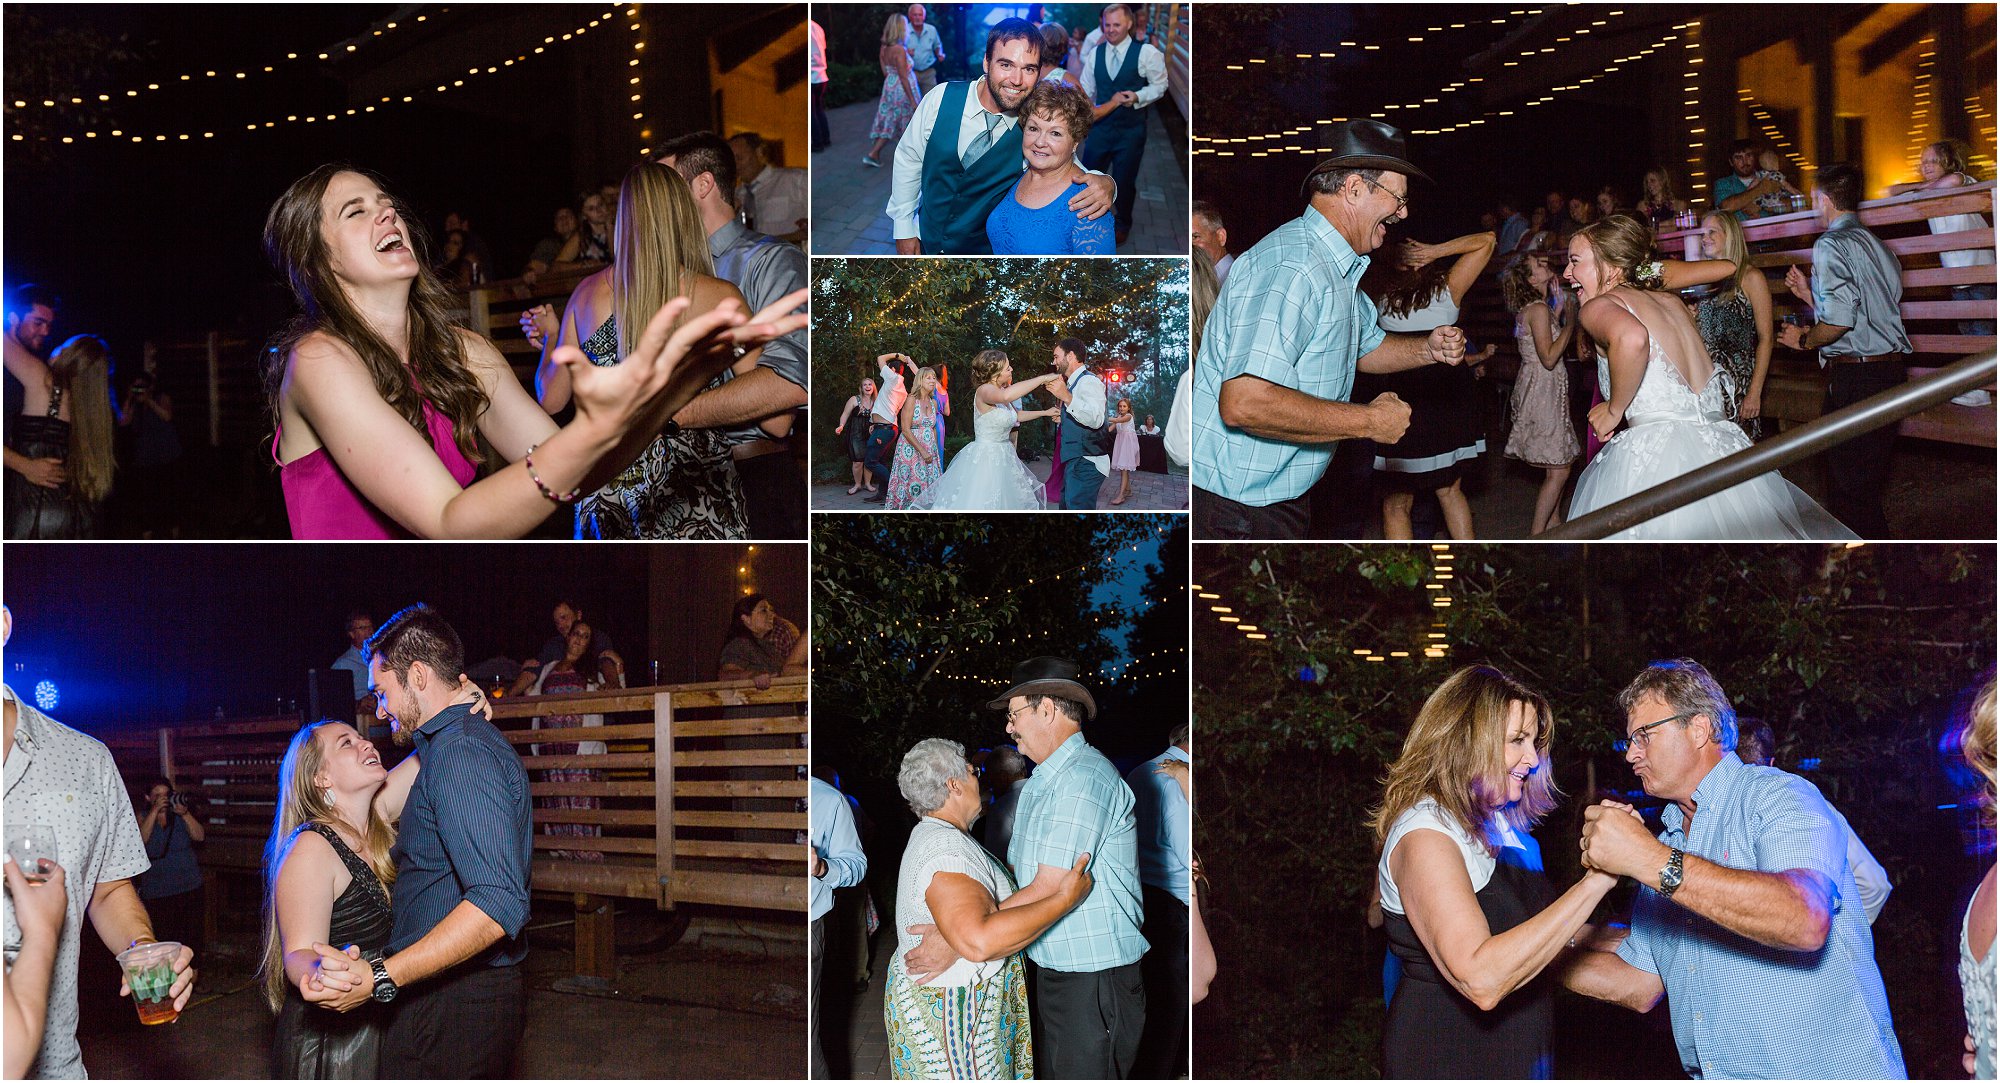 When Studio Jay delivers the tunes, all the guests are up enjoying themselves at Bend, Oregon's Rock Springs Ranch wedding venue. | Erica Swantek Photography